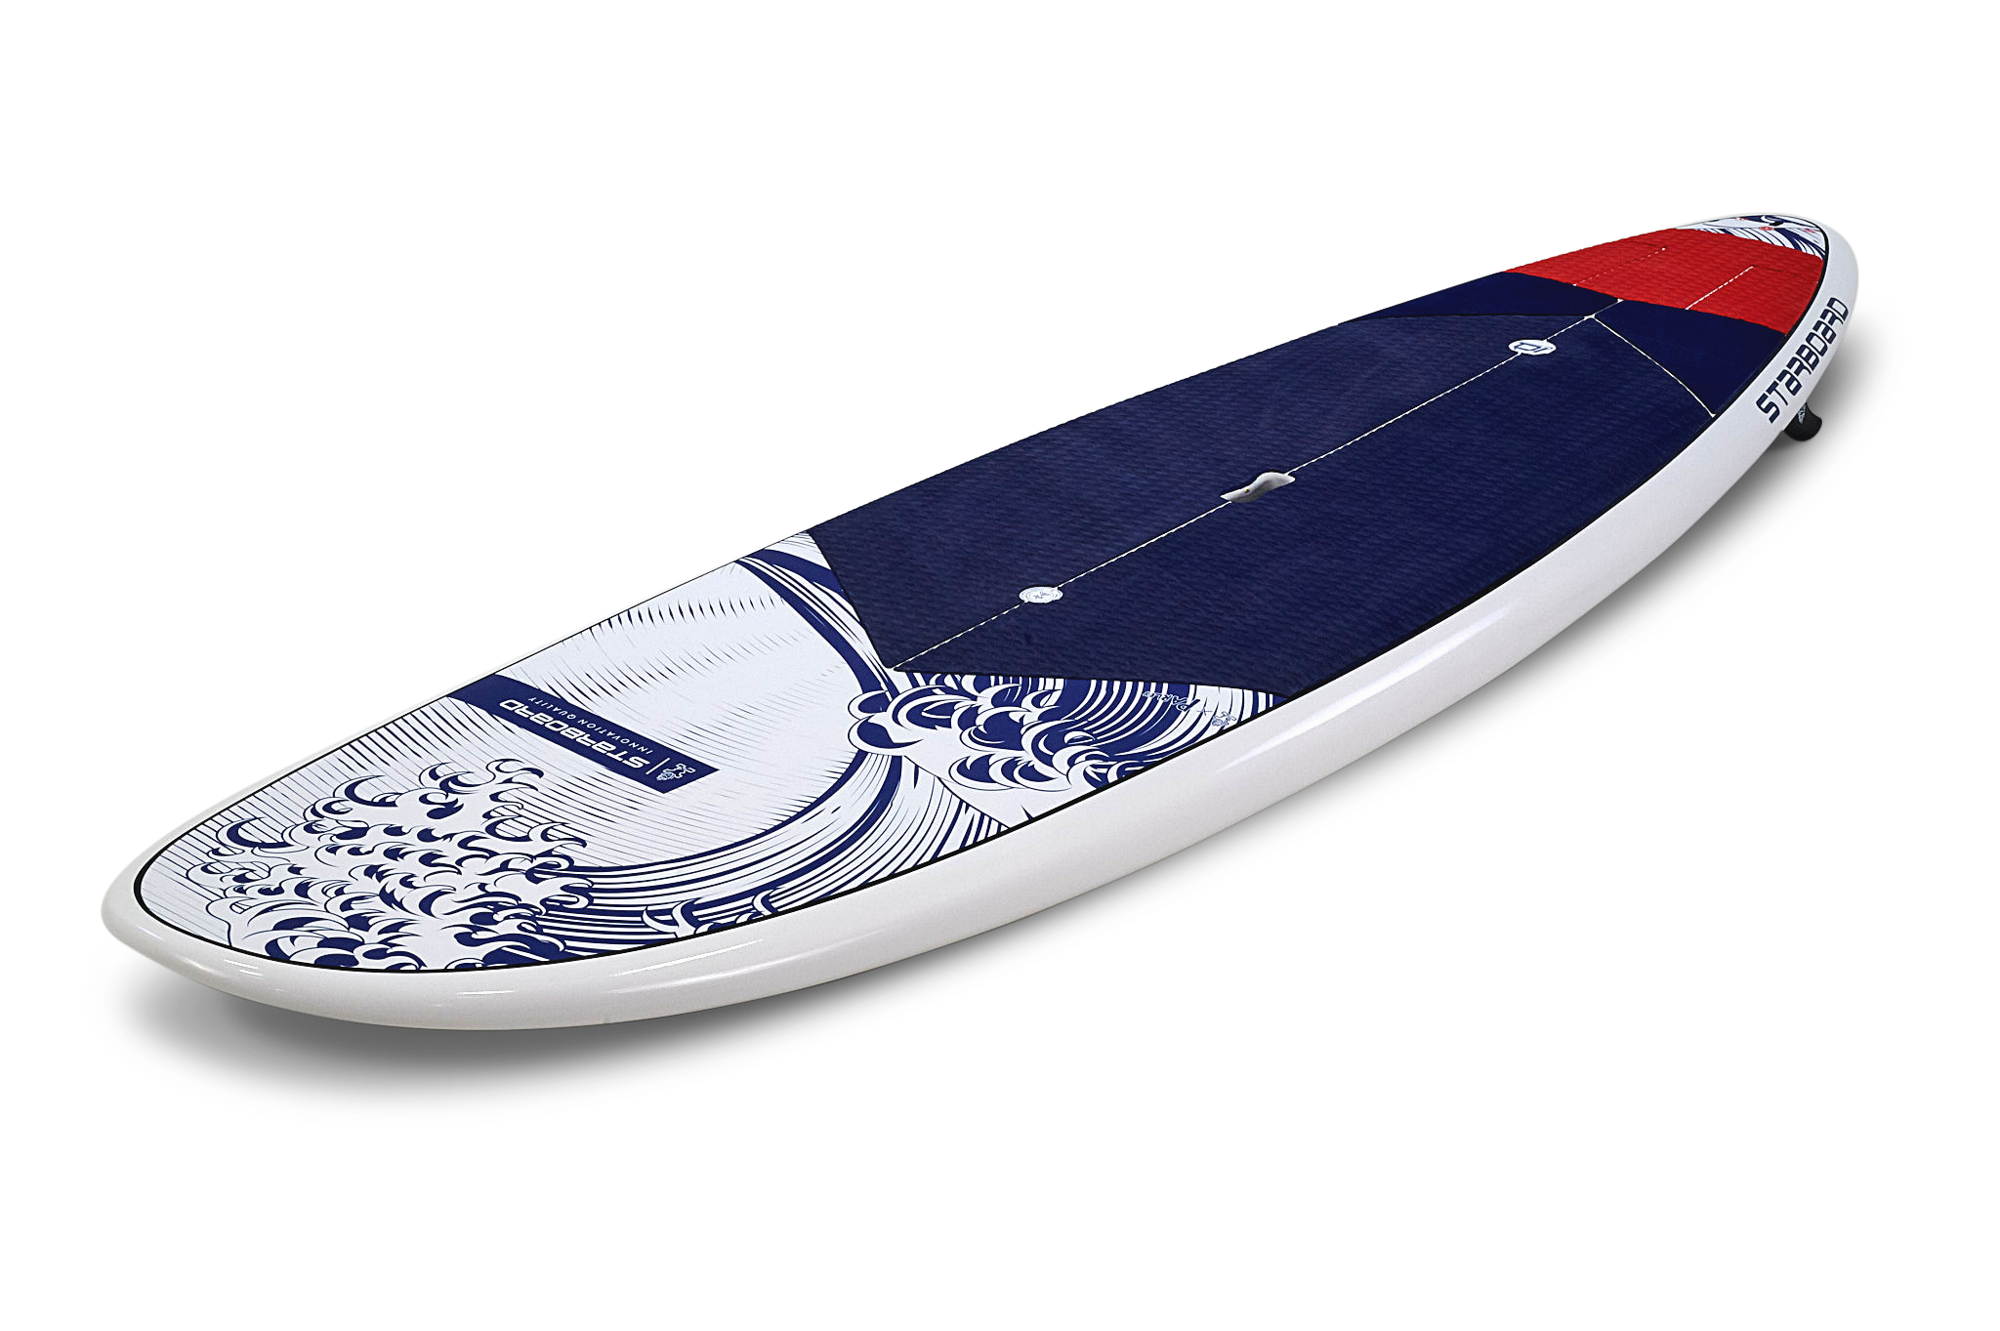 starboard paddleboard stand up SUP avanti wide ride hard board